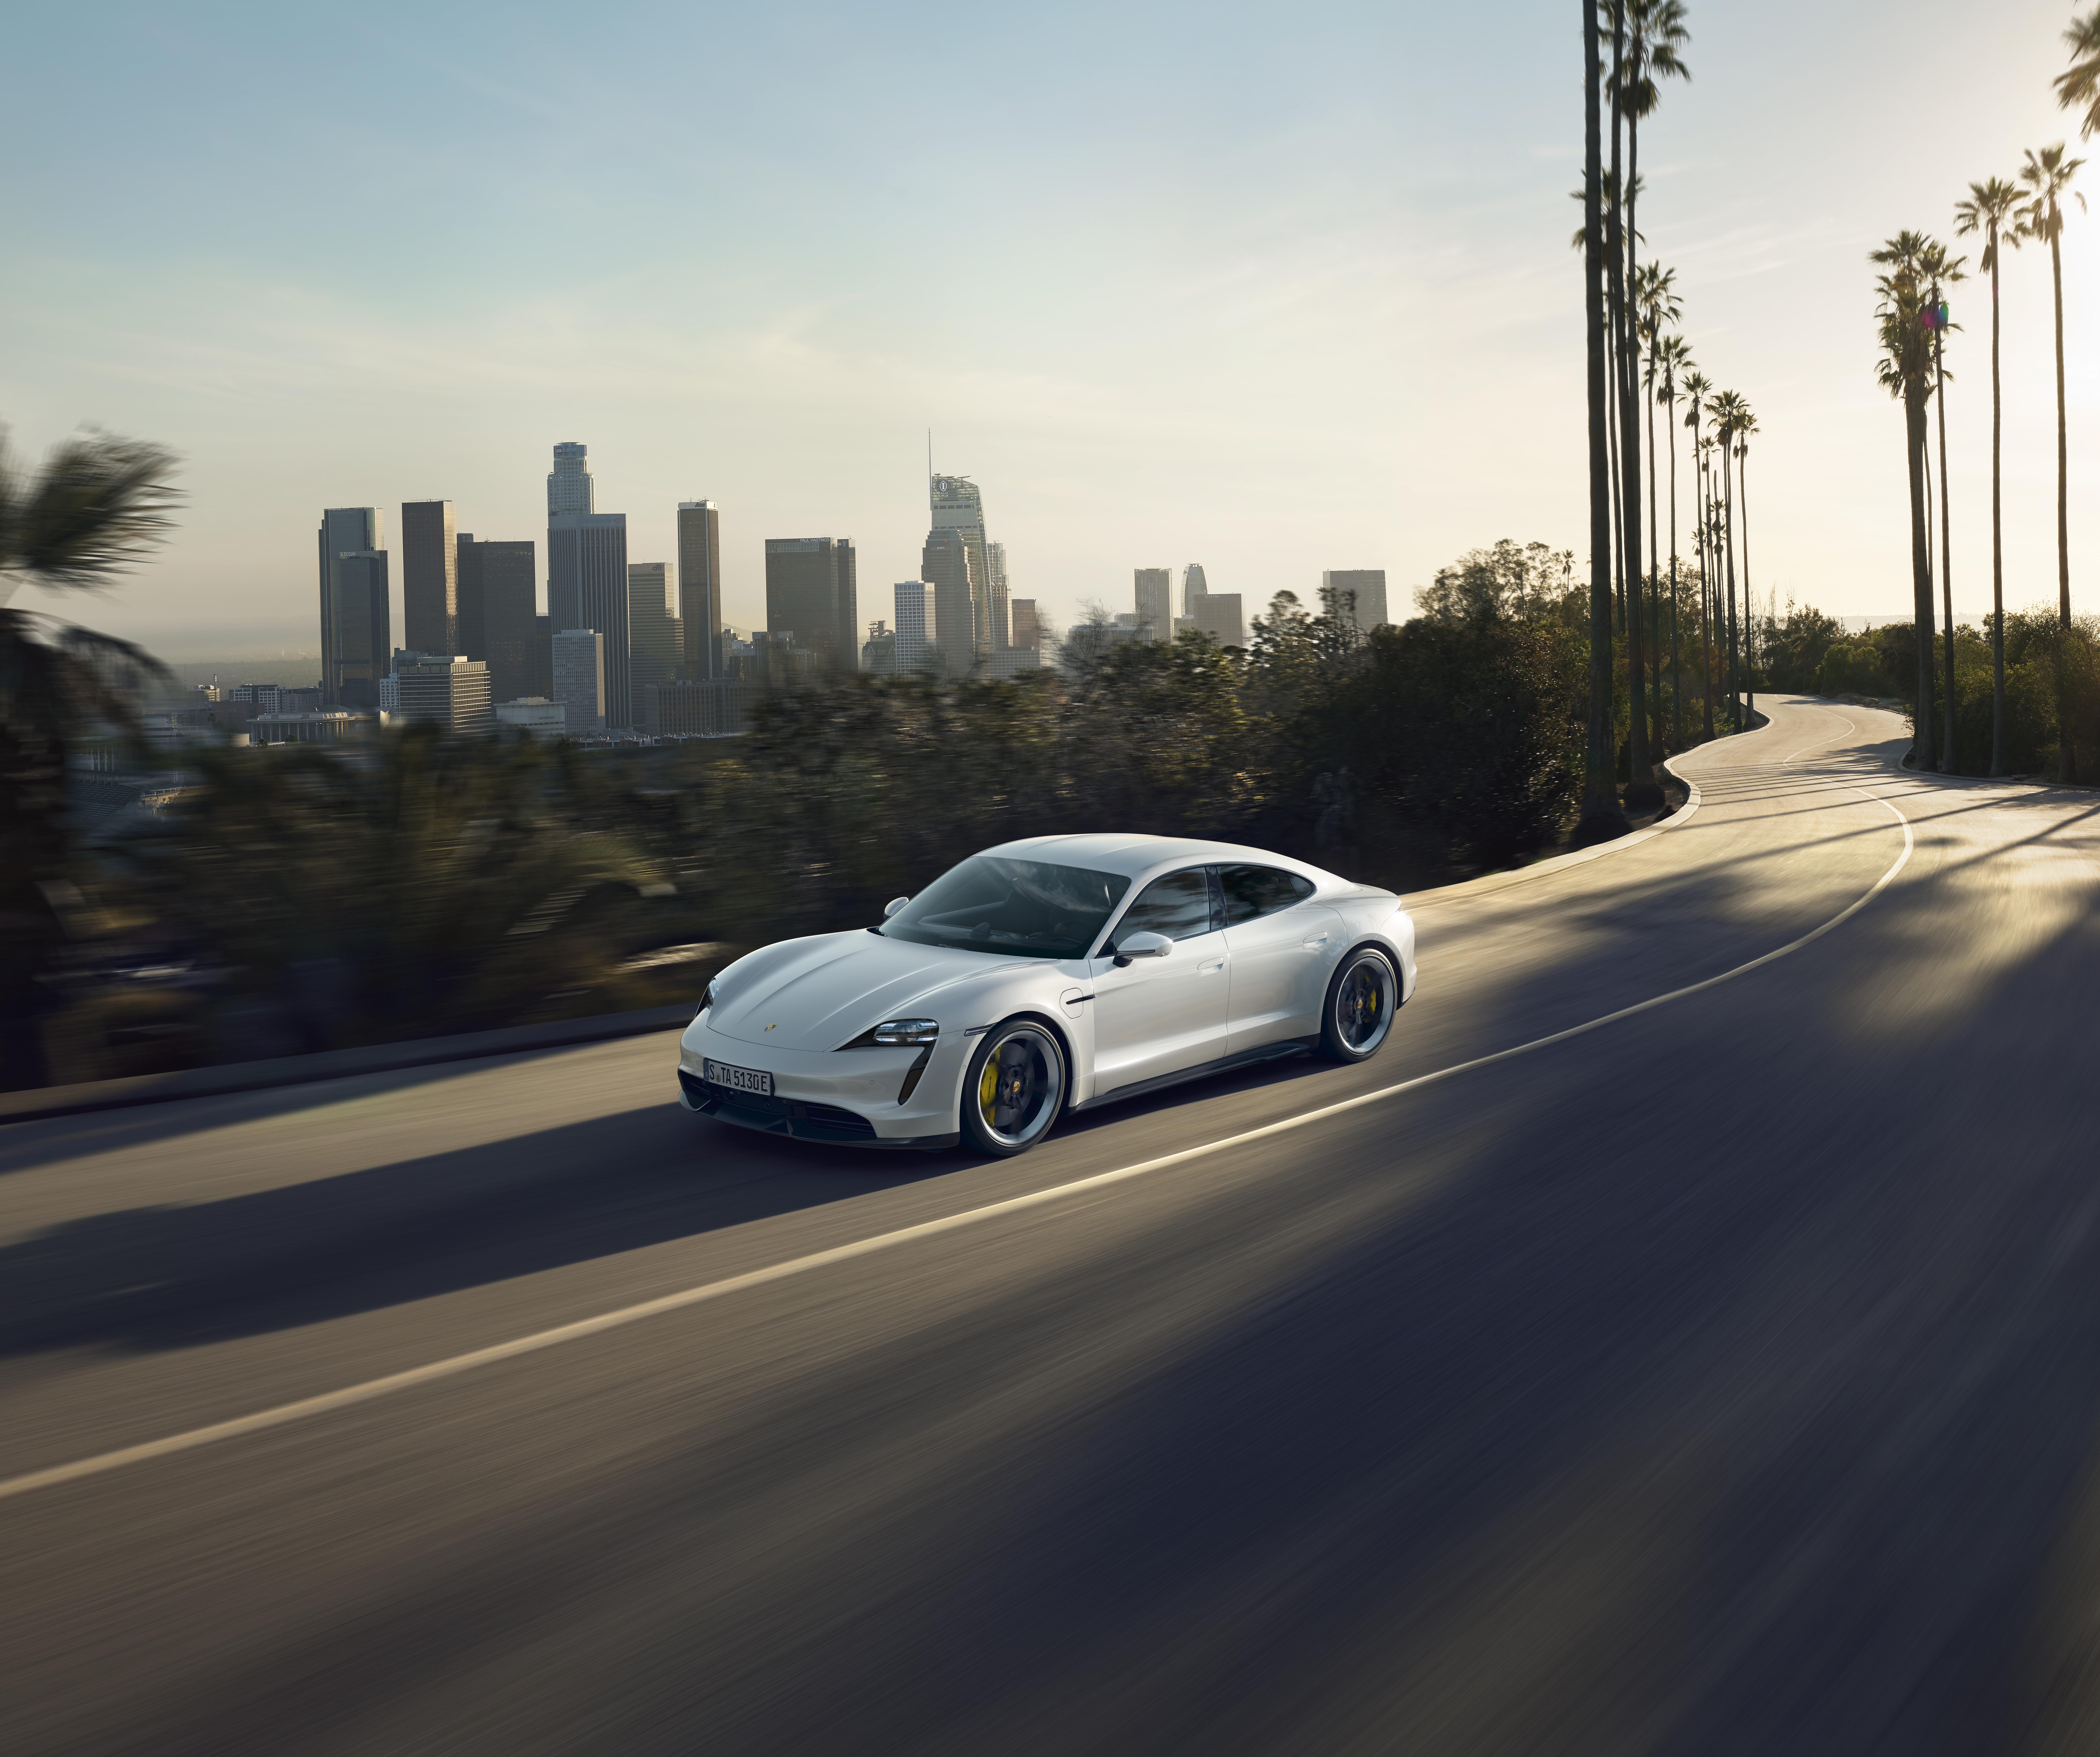 Porsche Taycan Turbo S on road, downtown Los Angeles behind